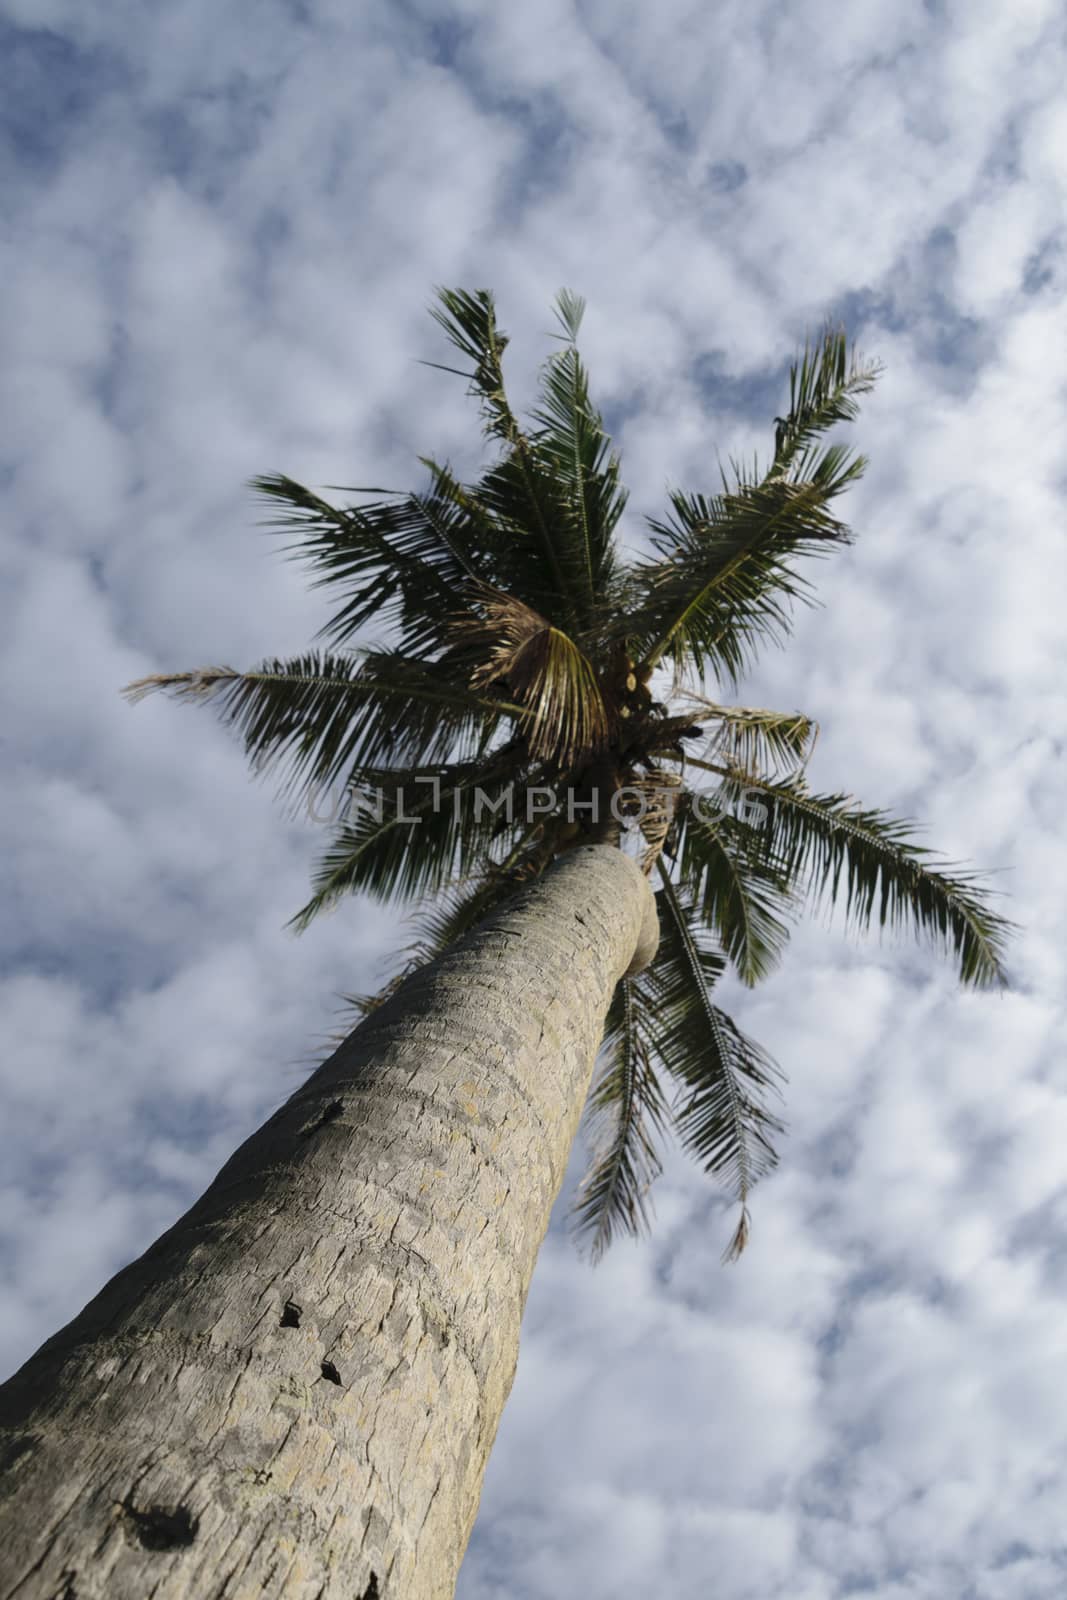 Sri Lanka, - Sept 2015:  Upward view of a palm tree - following the trunk  to the leaves and the sky